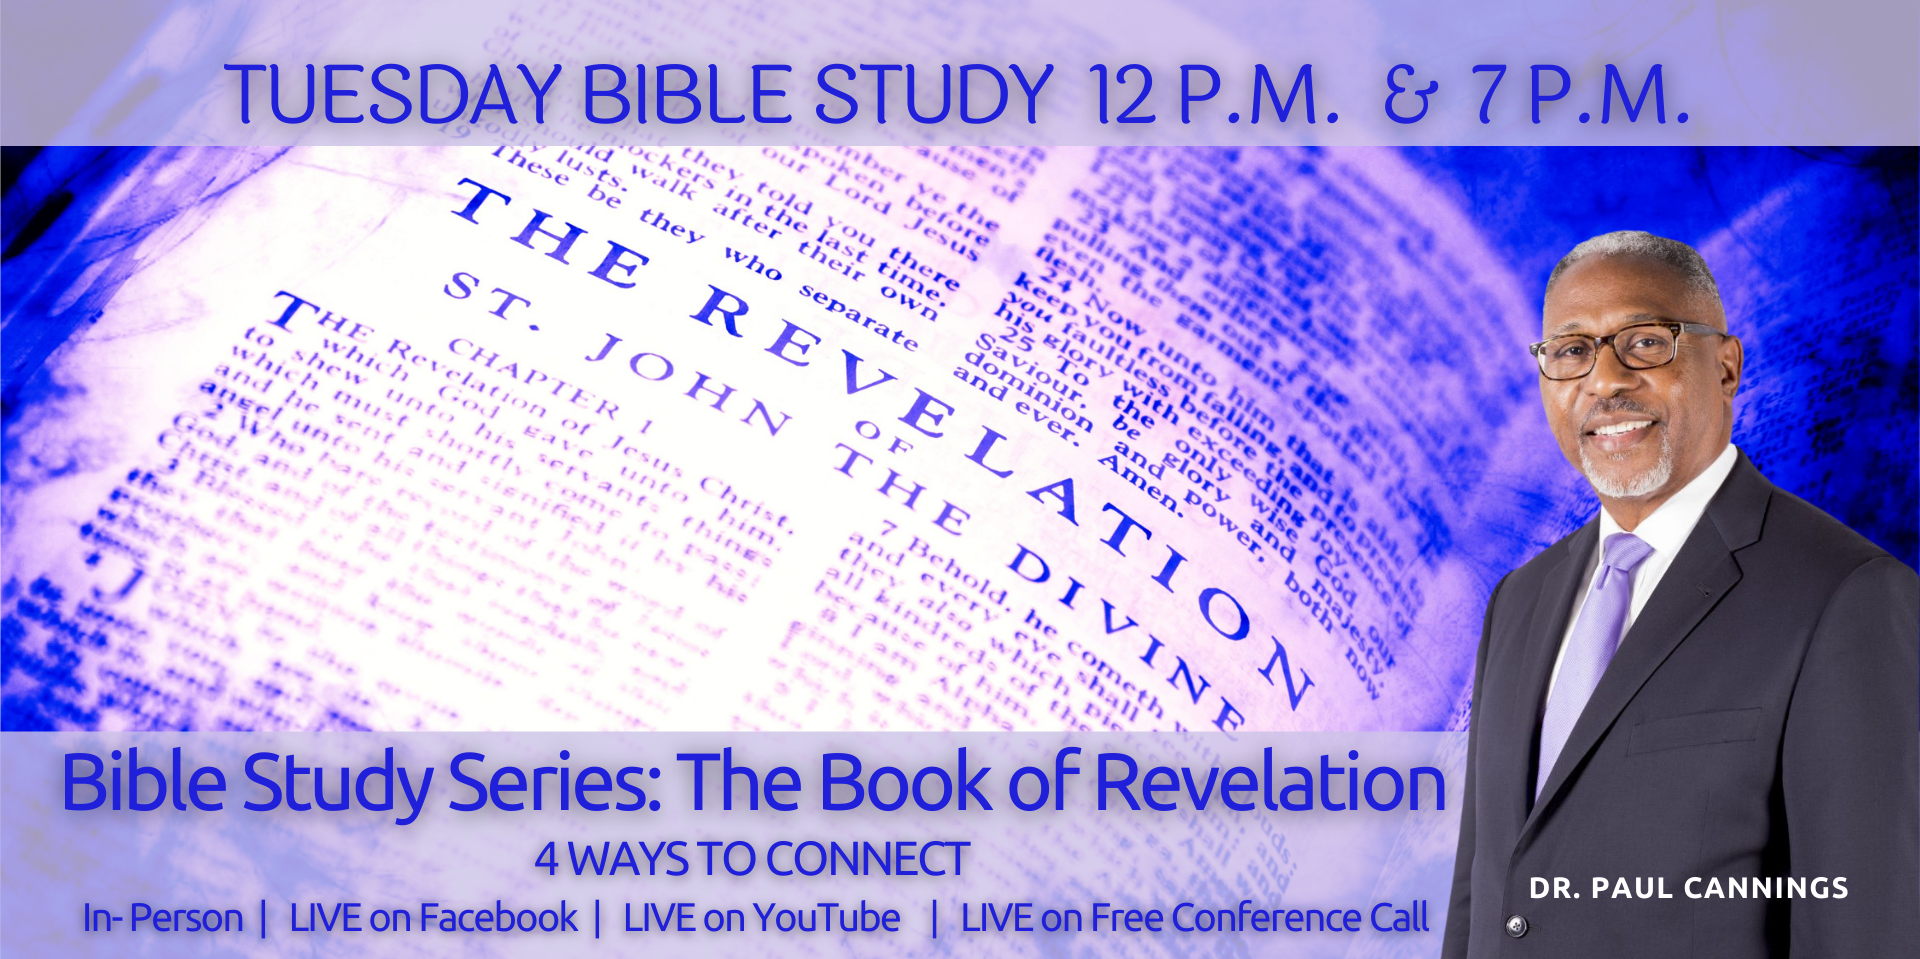 Tuesday Bible Study Series - The Book of Revelation